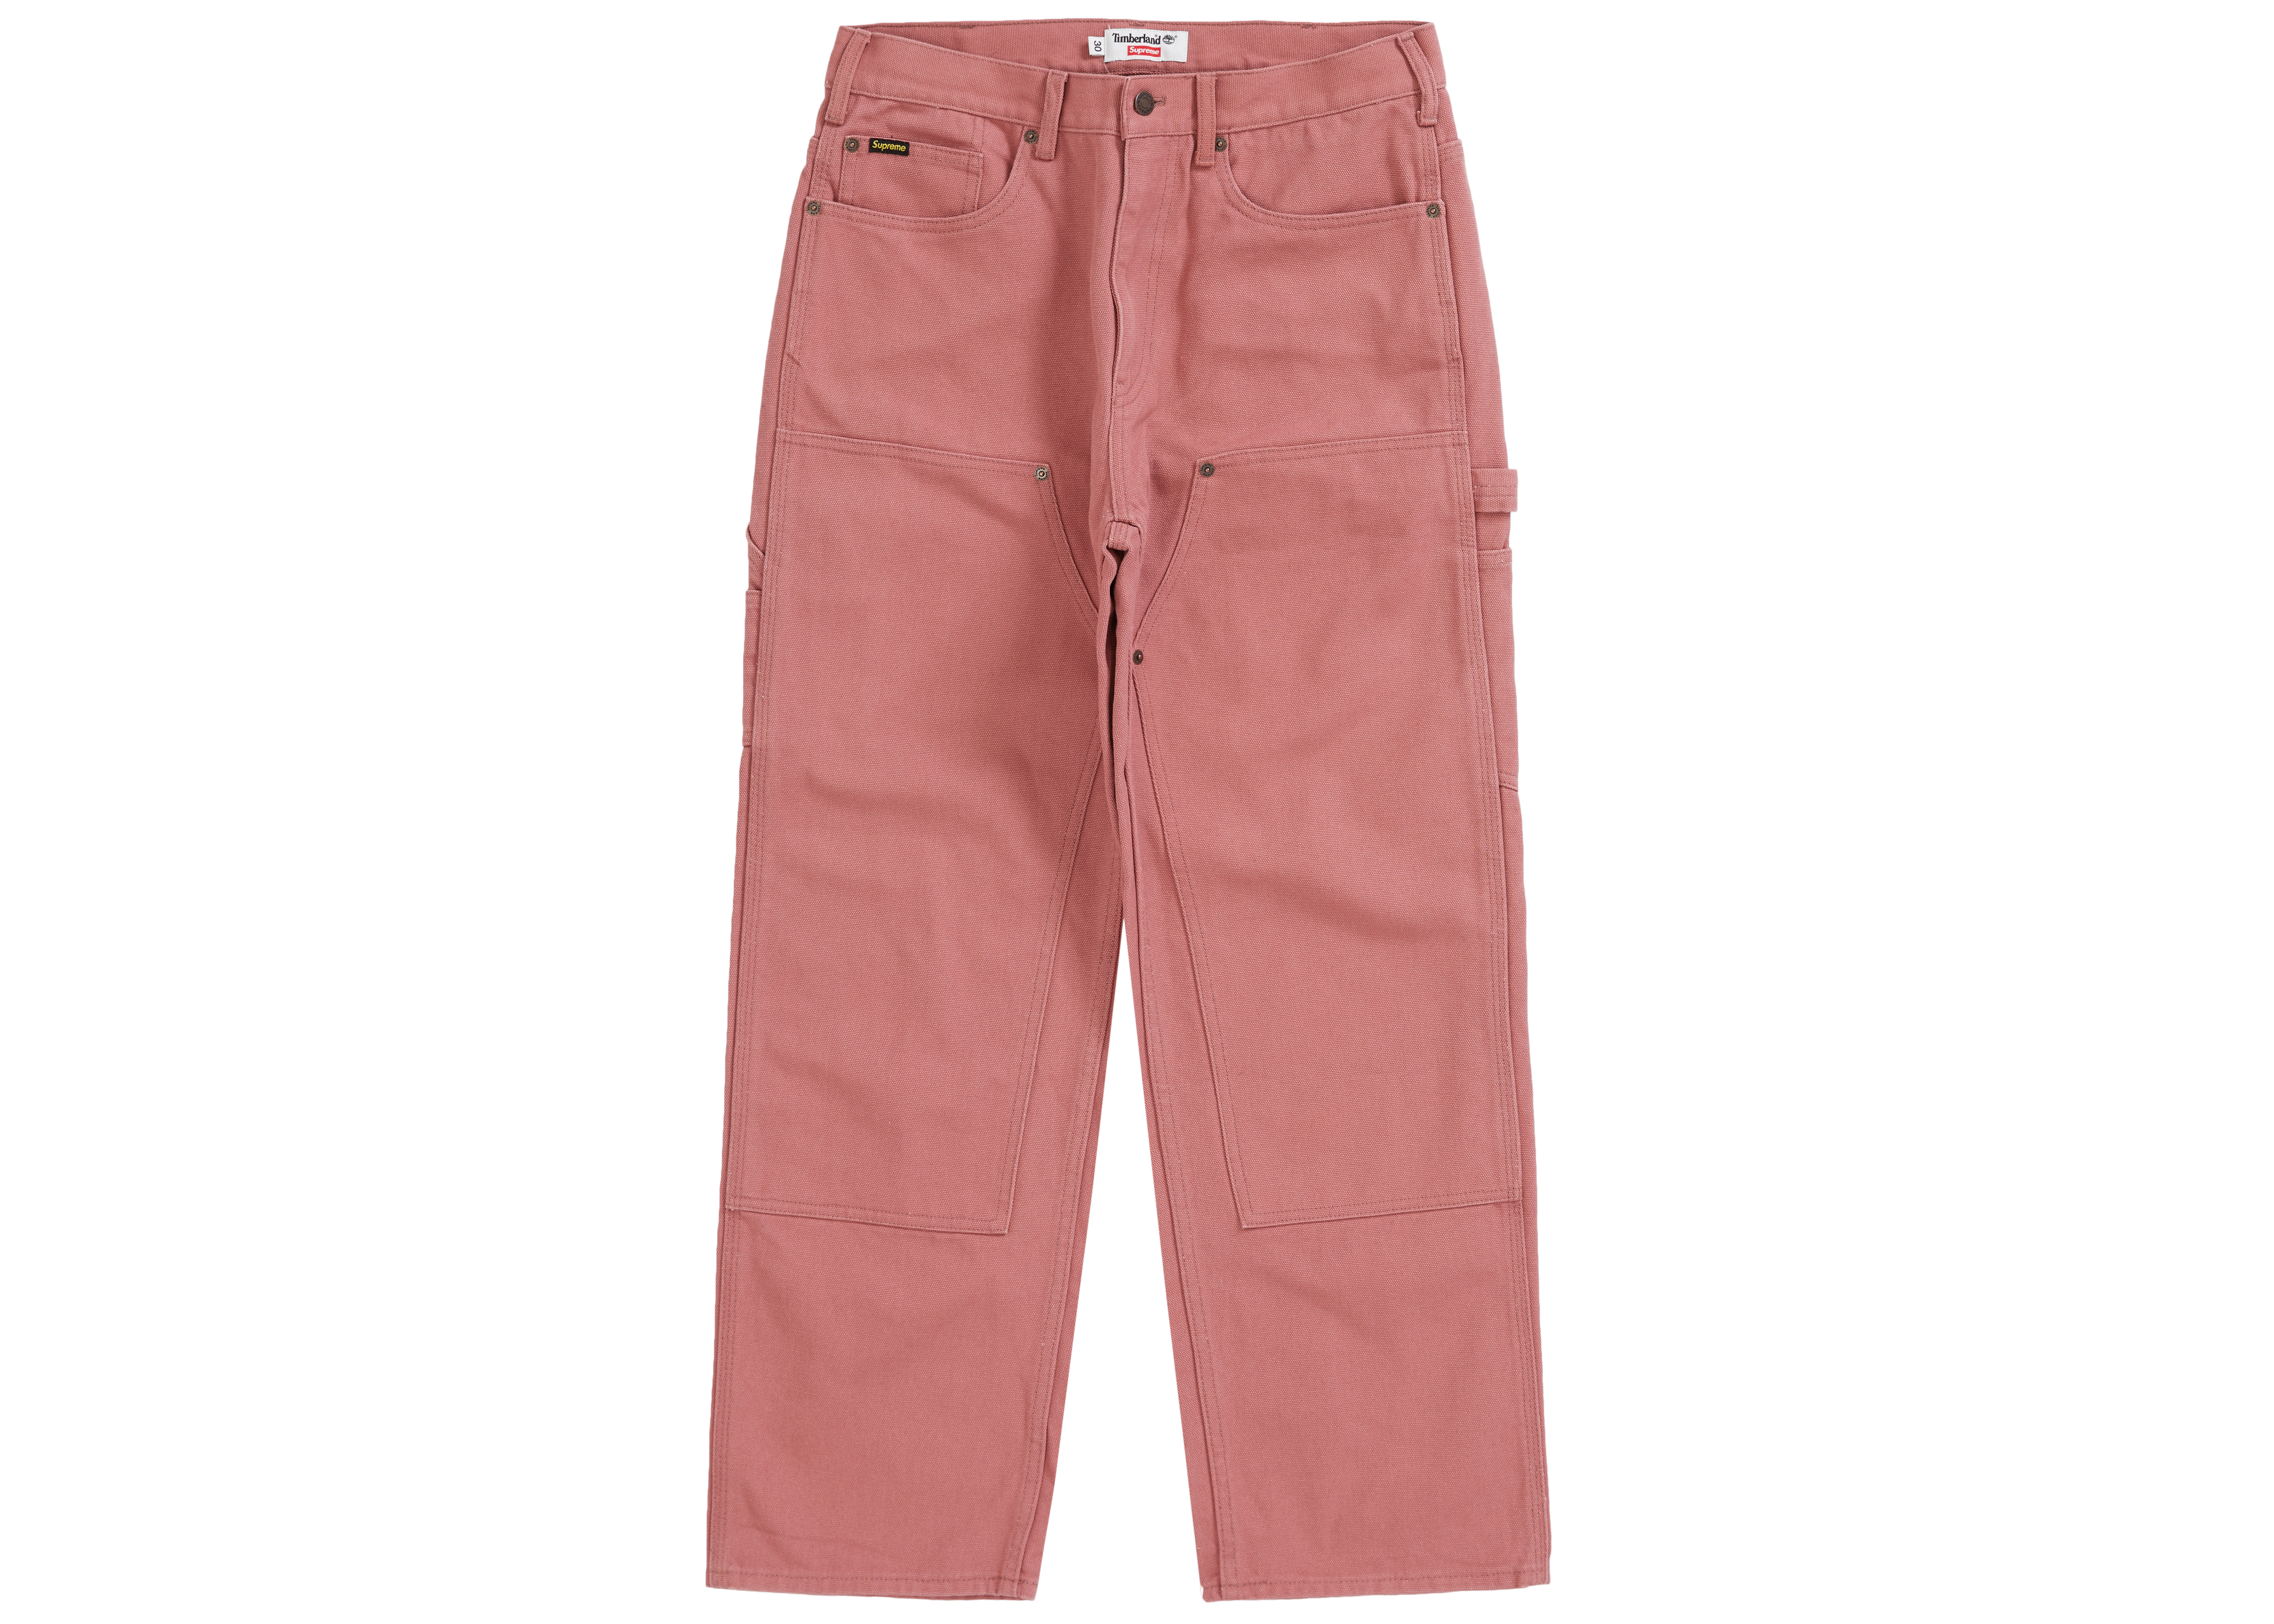 Supreme Timberland Double Knee Painter Pant Dusty Red Men's